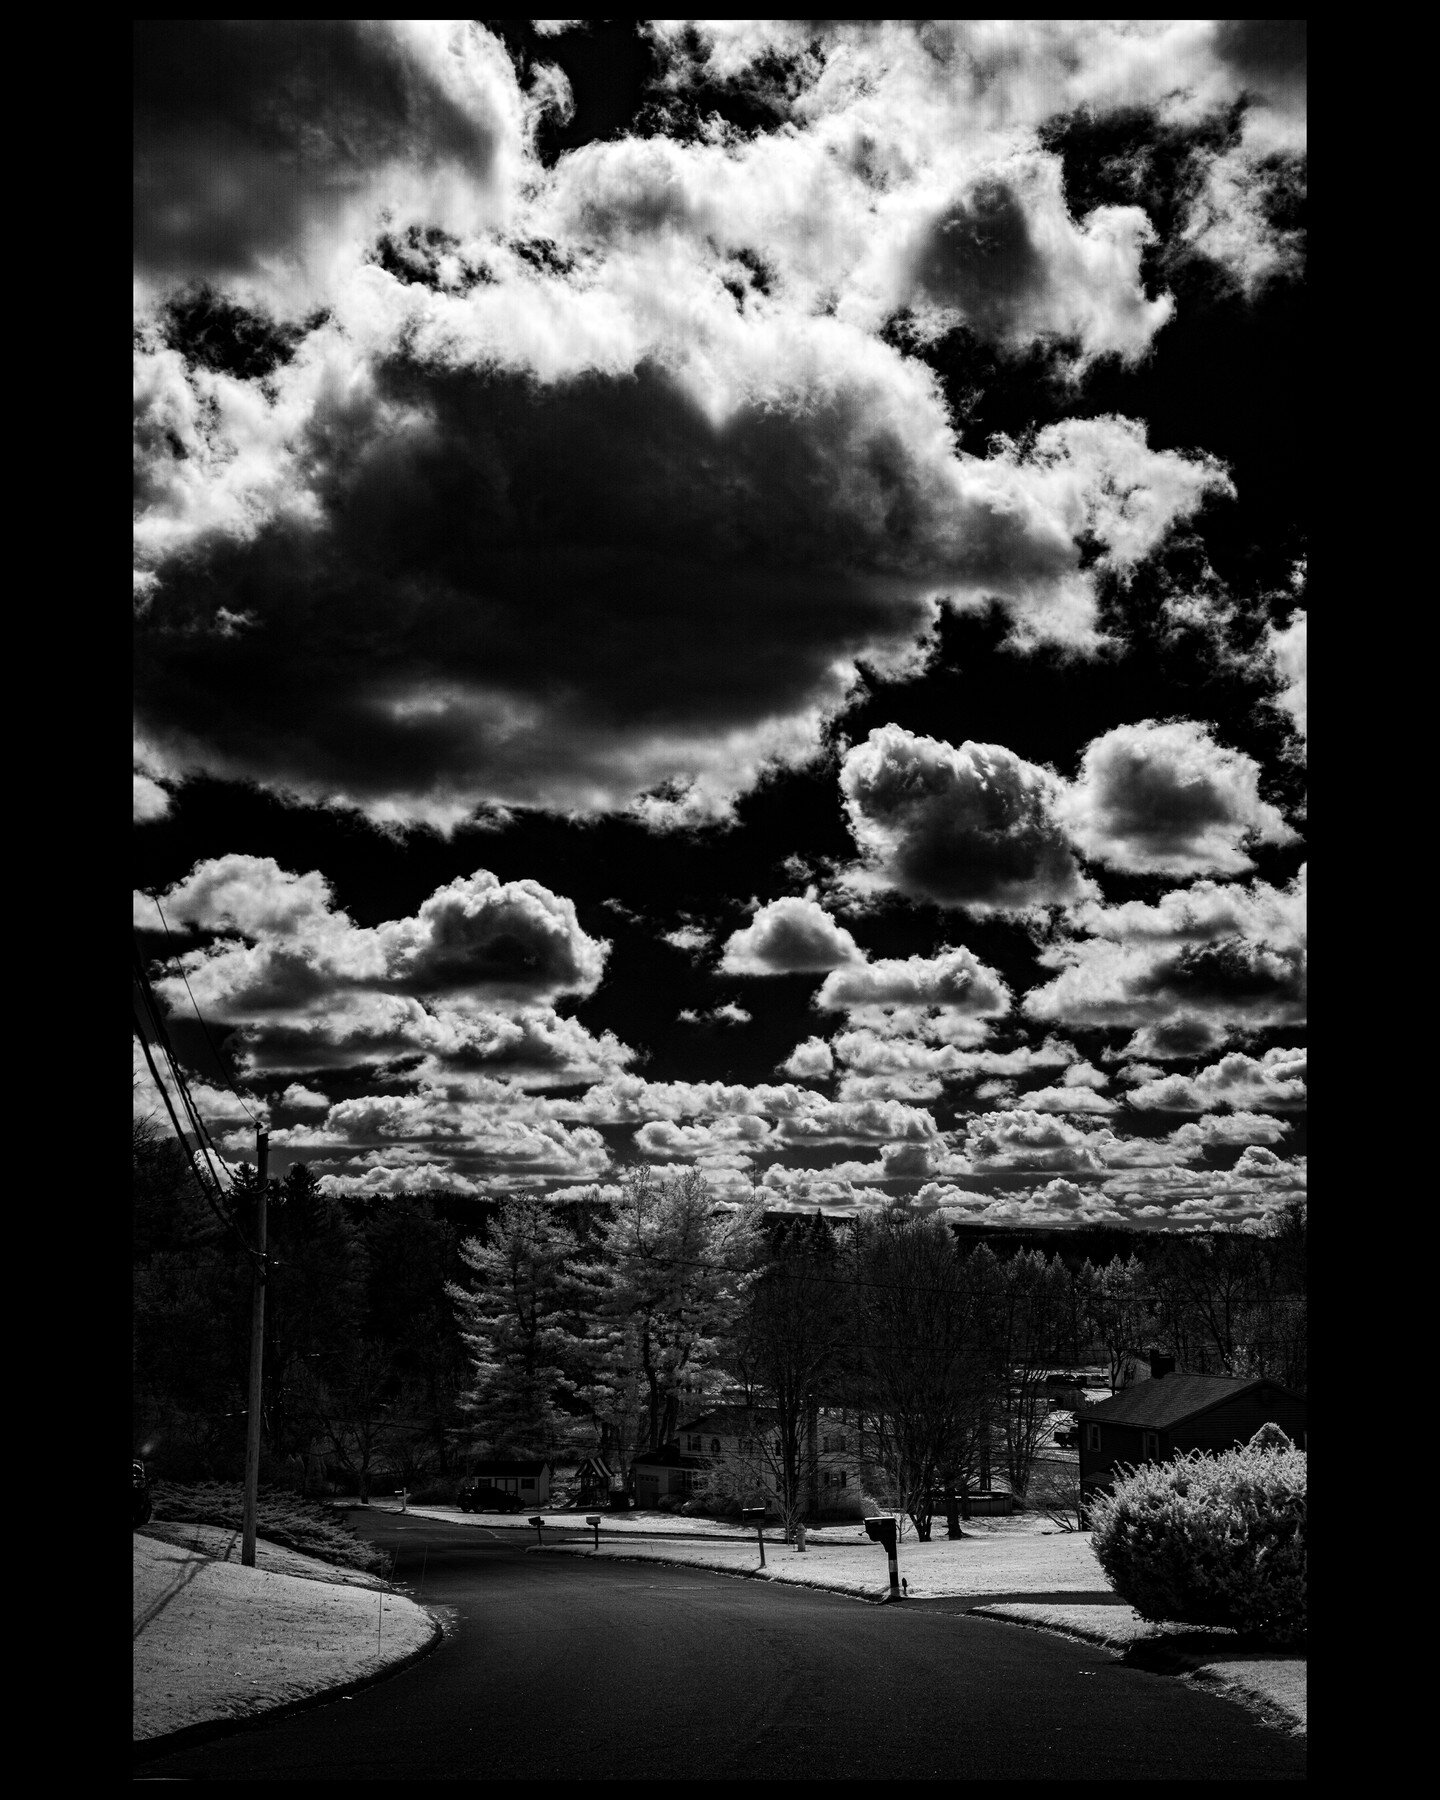 clouds from the past few weeks

photographed in infrared

.

.

.

#infraredphotography #abstractart #cloudstagram #experimentalphotography #experimentalphoto #filmisalive #filmfeed #cloudappreciationsociety #bnw_of_our_world #cloudscapes #fadedworld